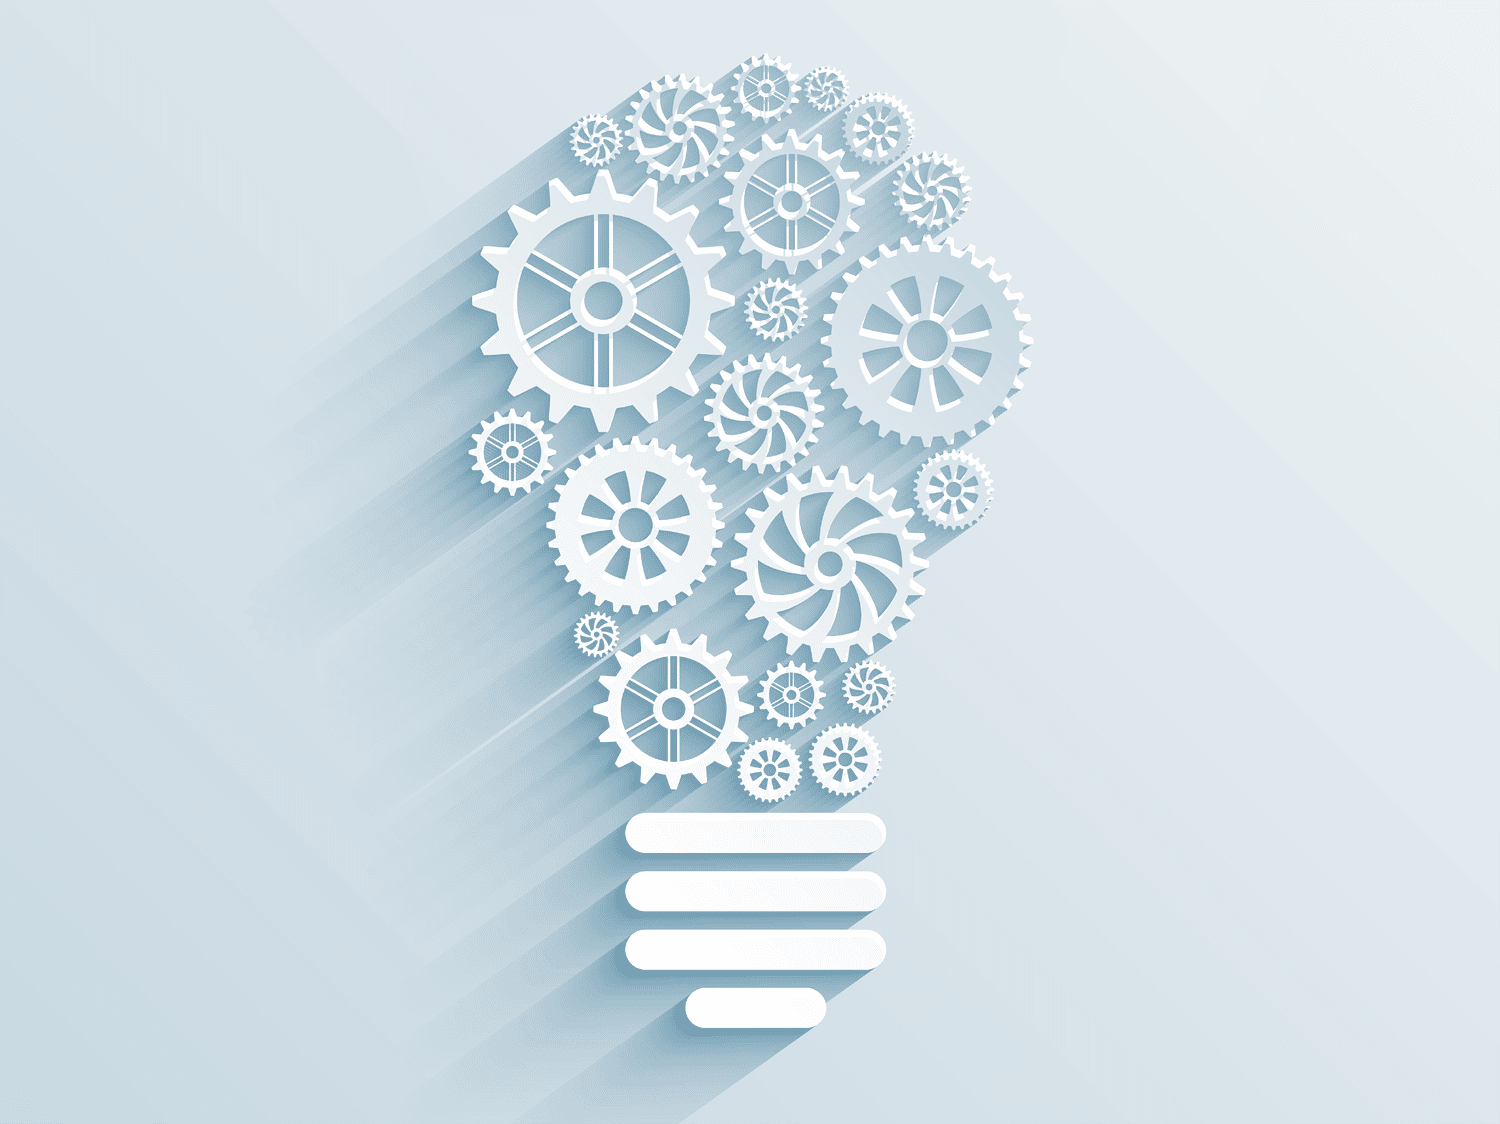 How to Improve Product Innovation at Your Company